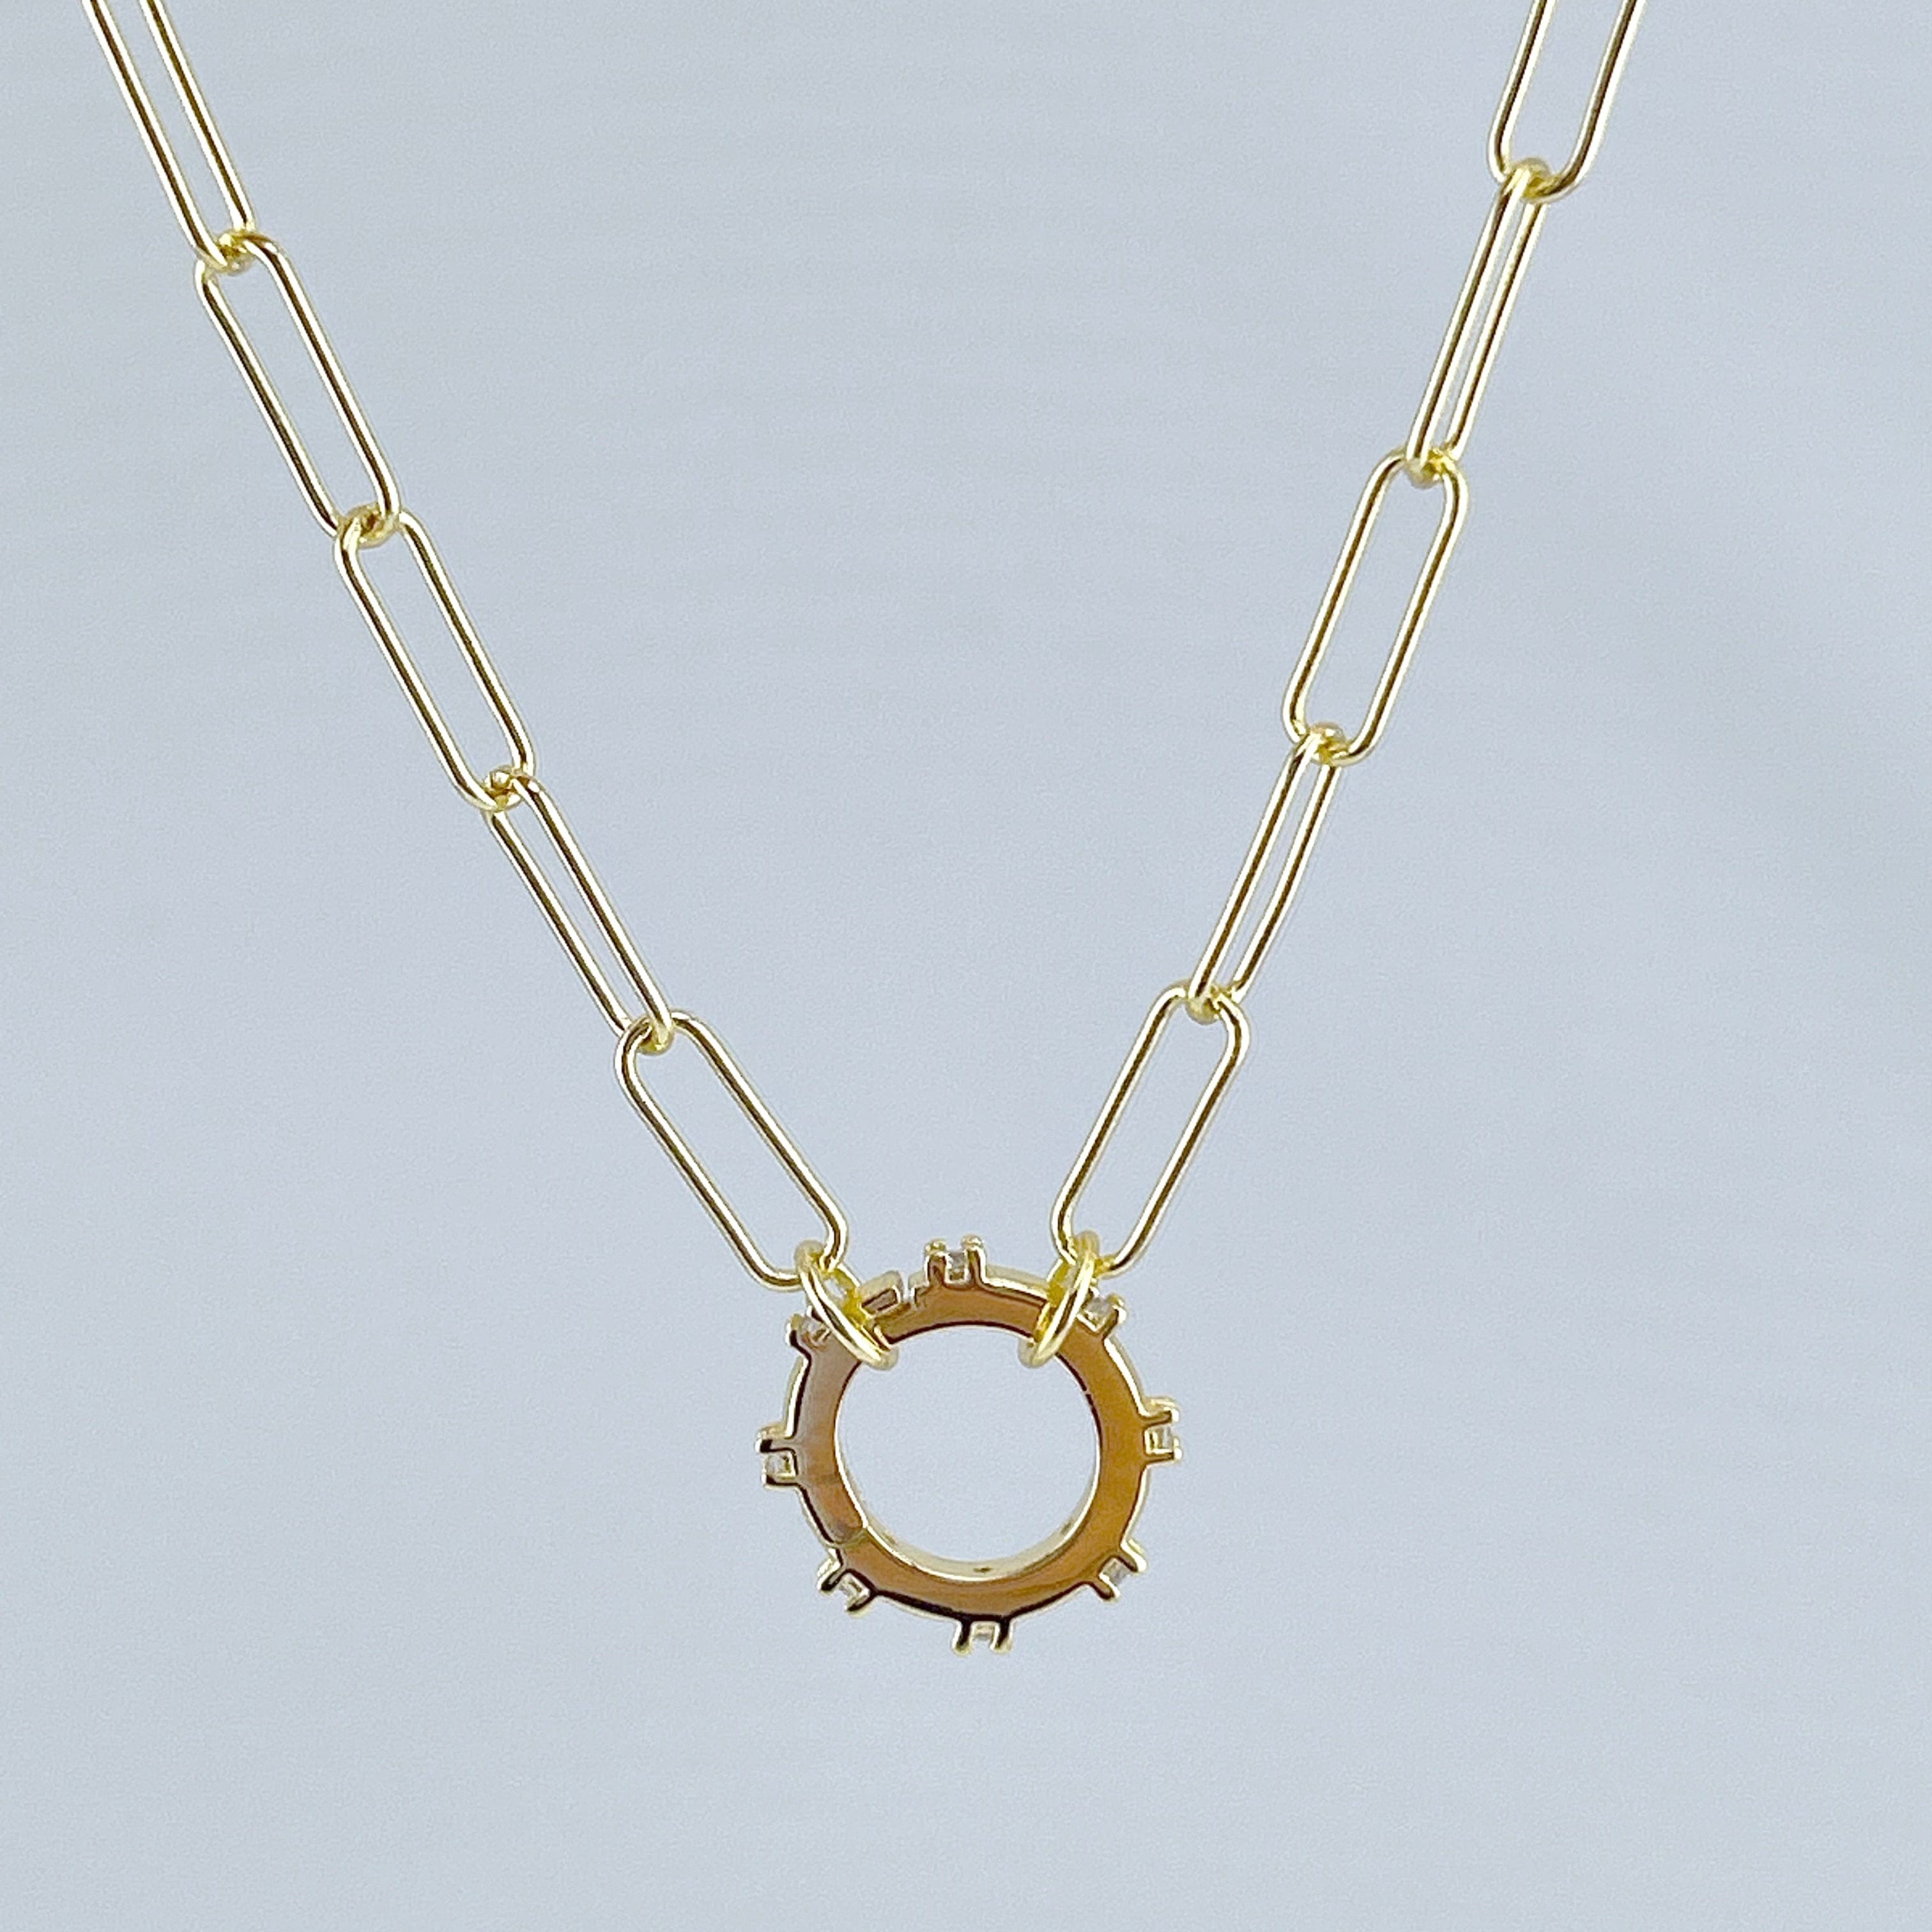  picture of a gold paper clip chain style necklace with a circle connector at the center